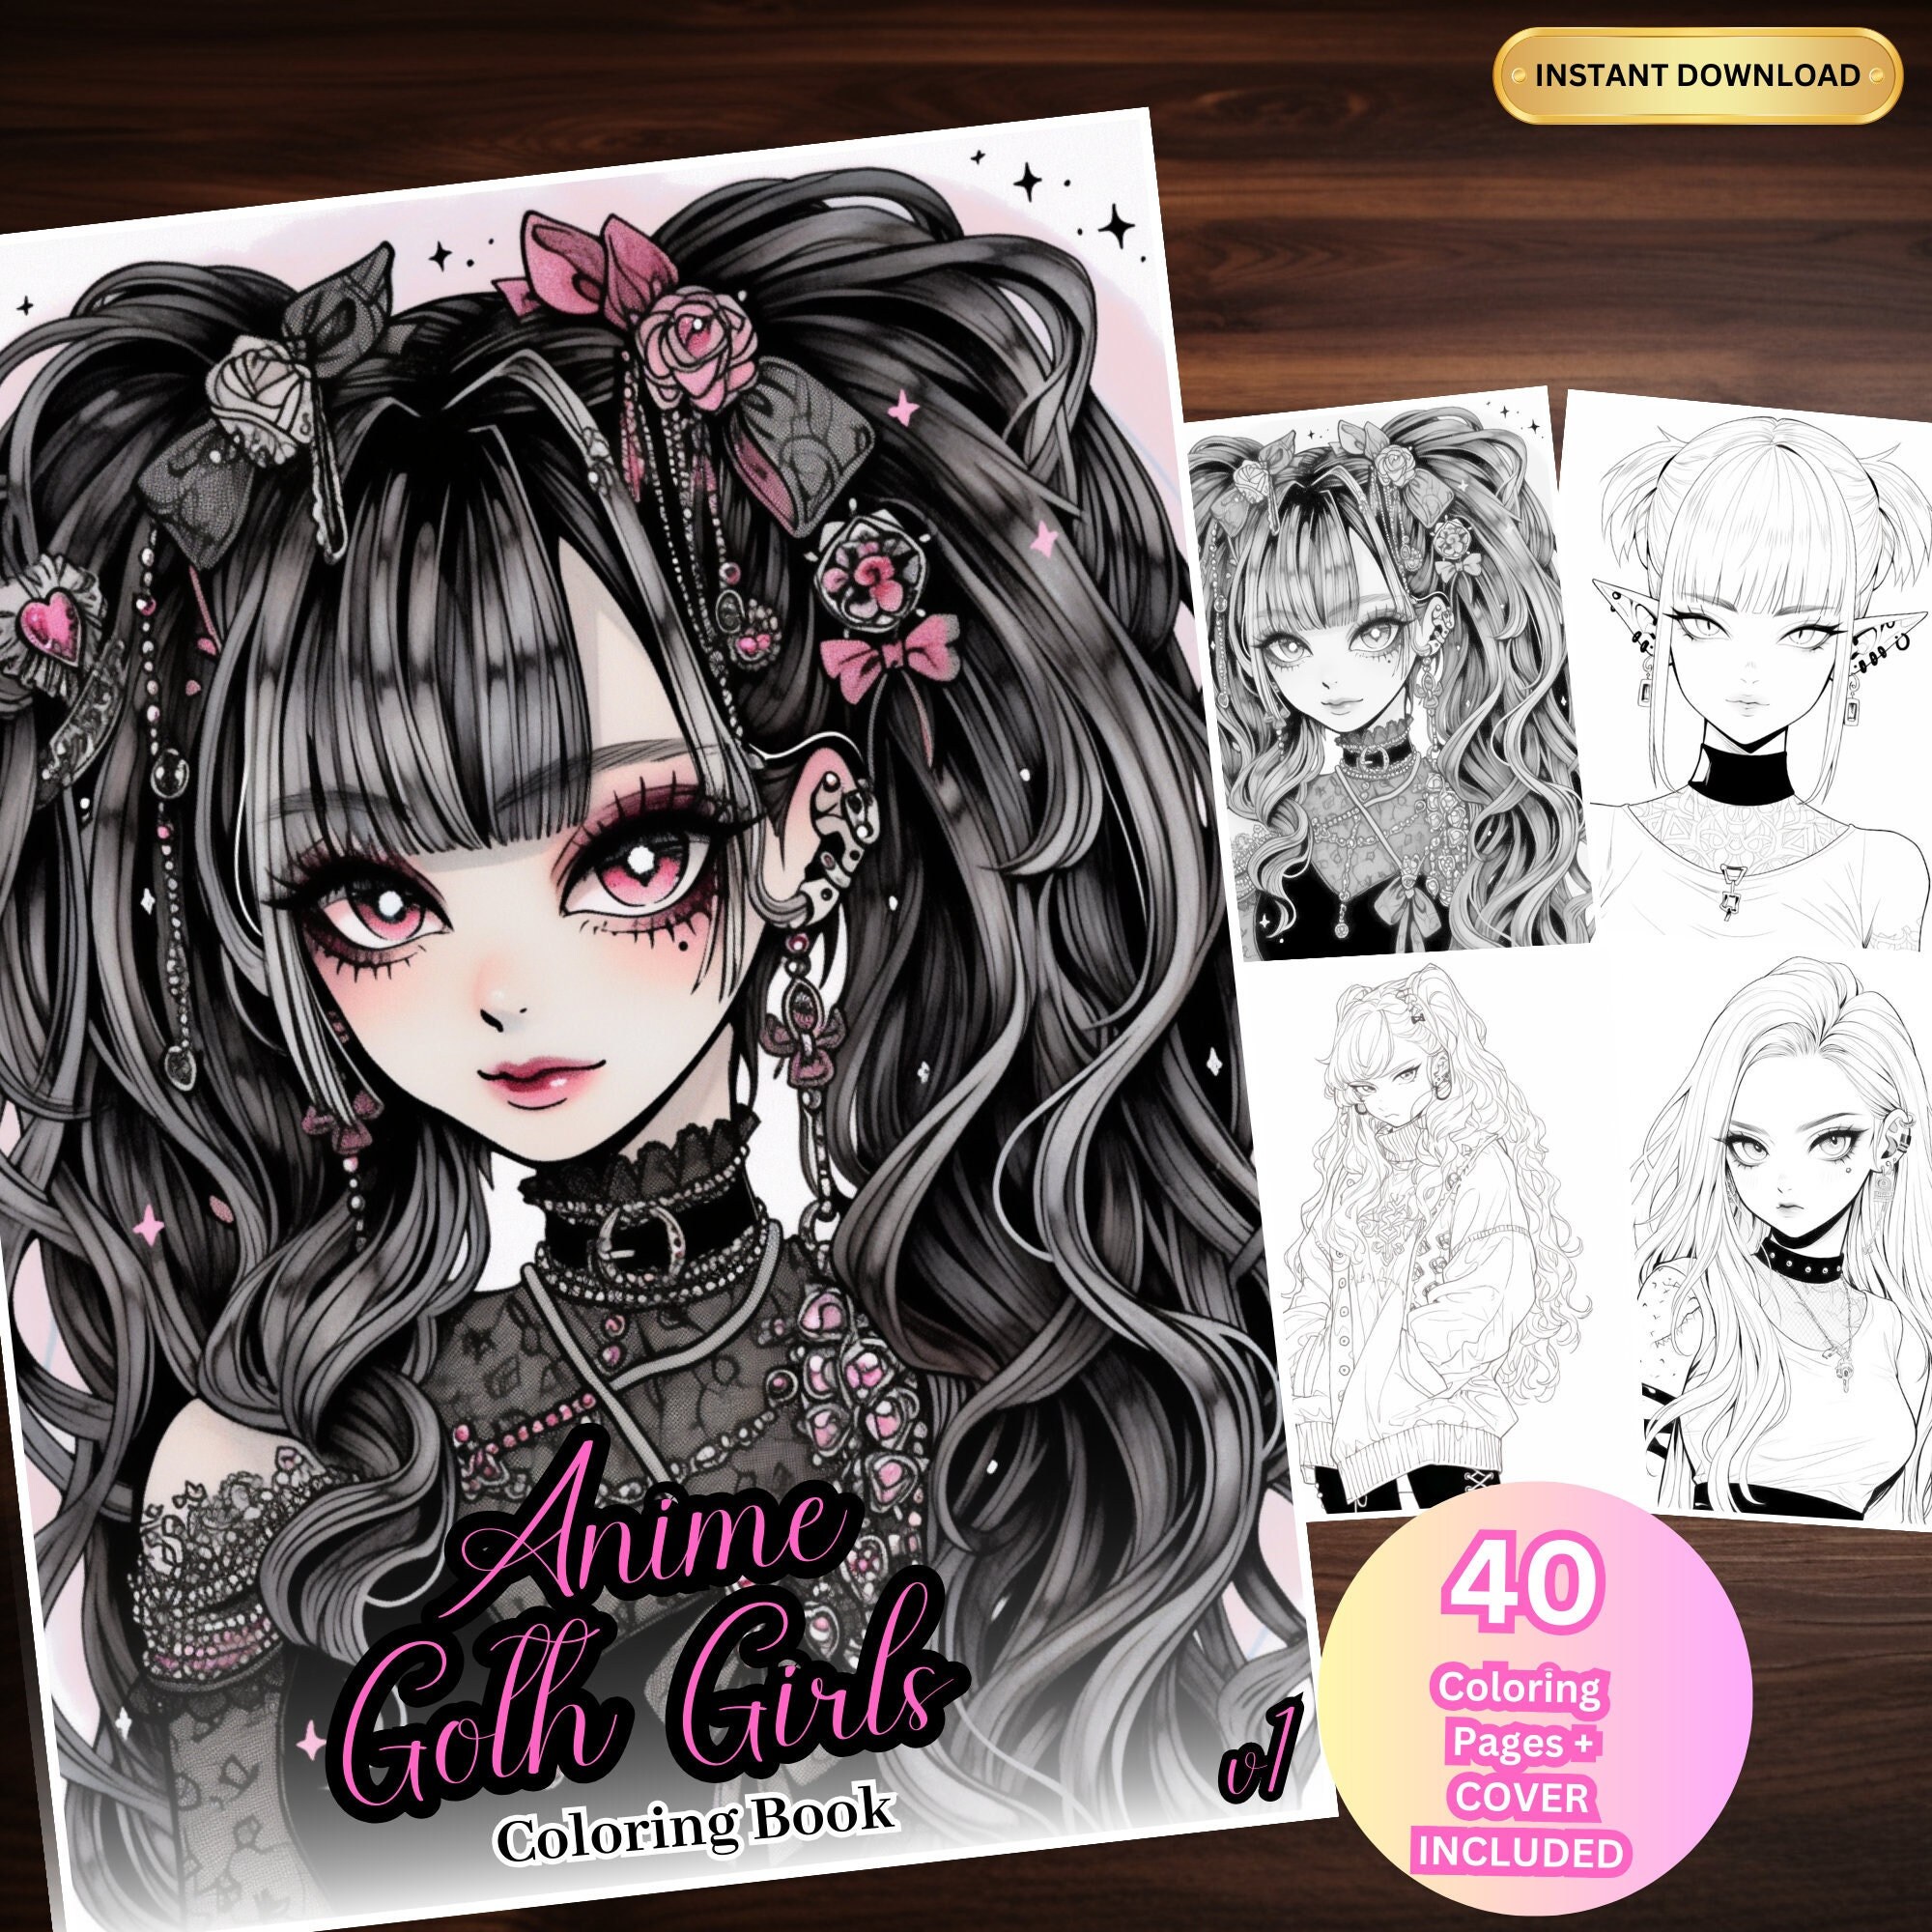 Gothic Dark Fantasy Coloring Book for Women: Big Coloring Book for Adults  Teen To Stress Relief